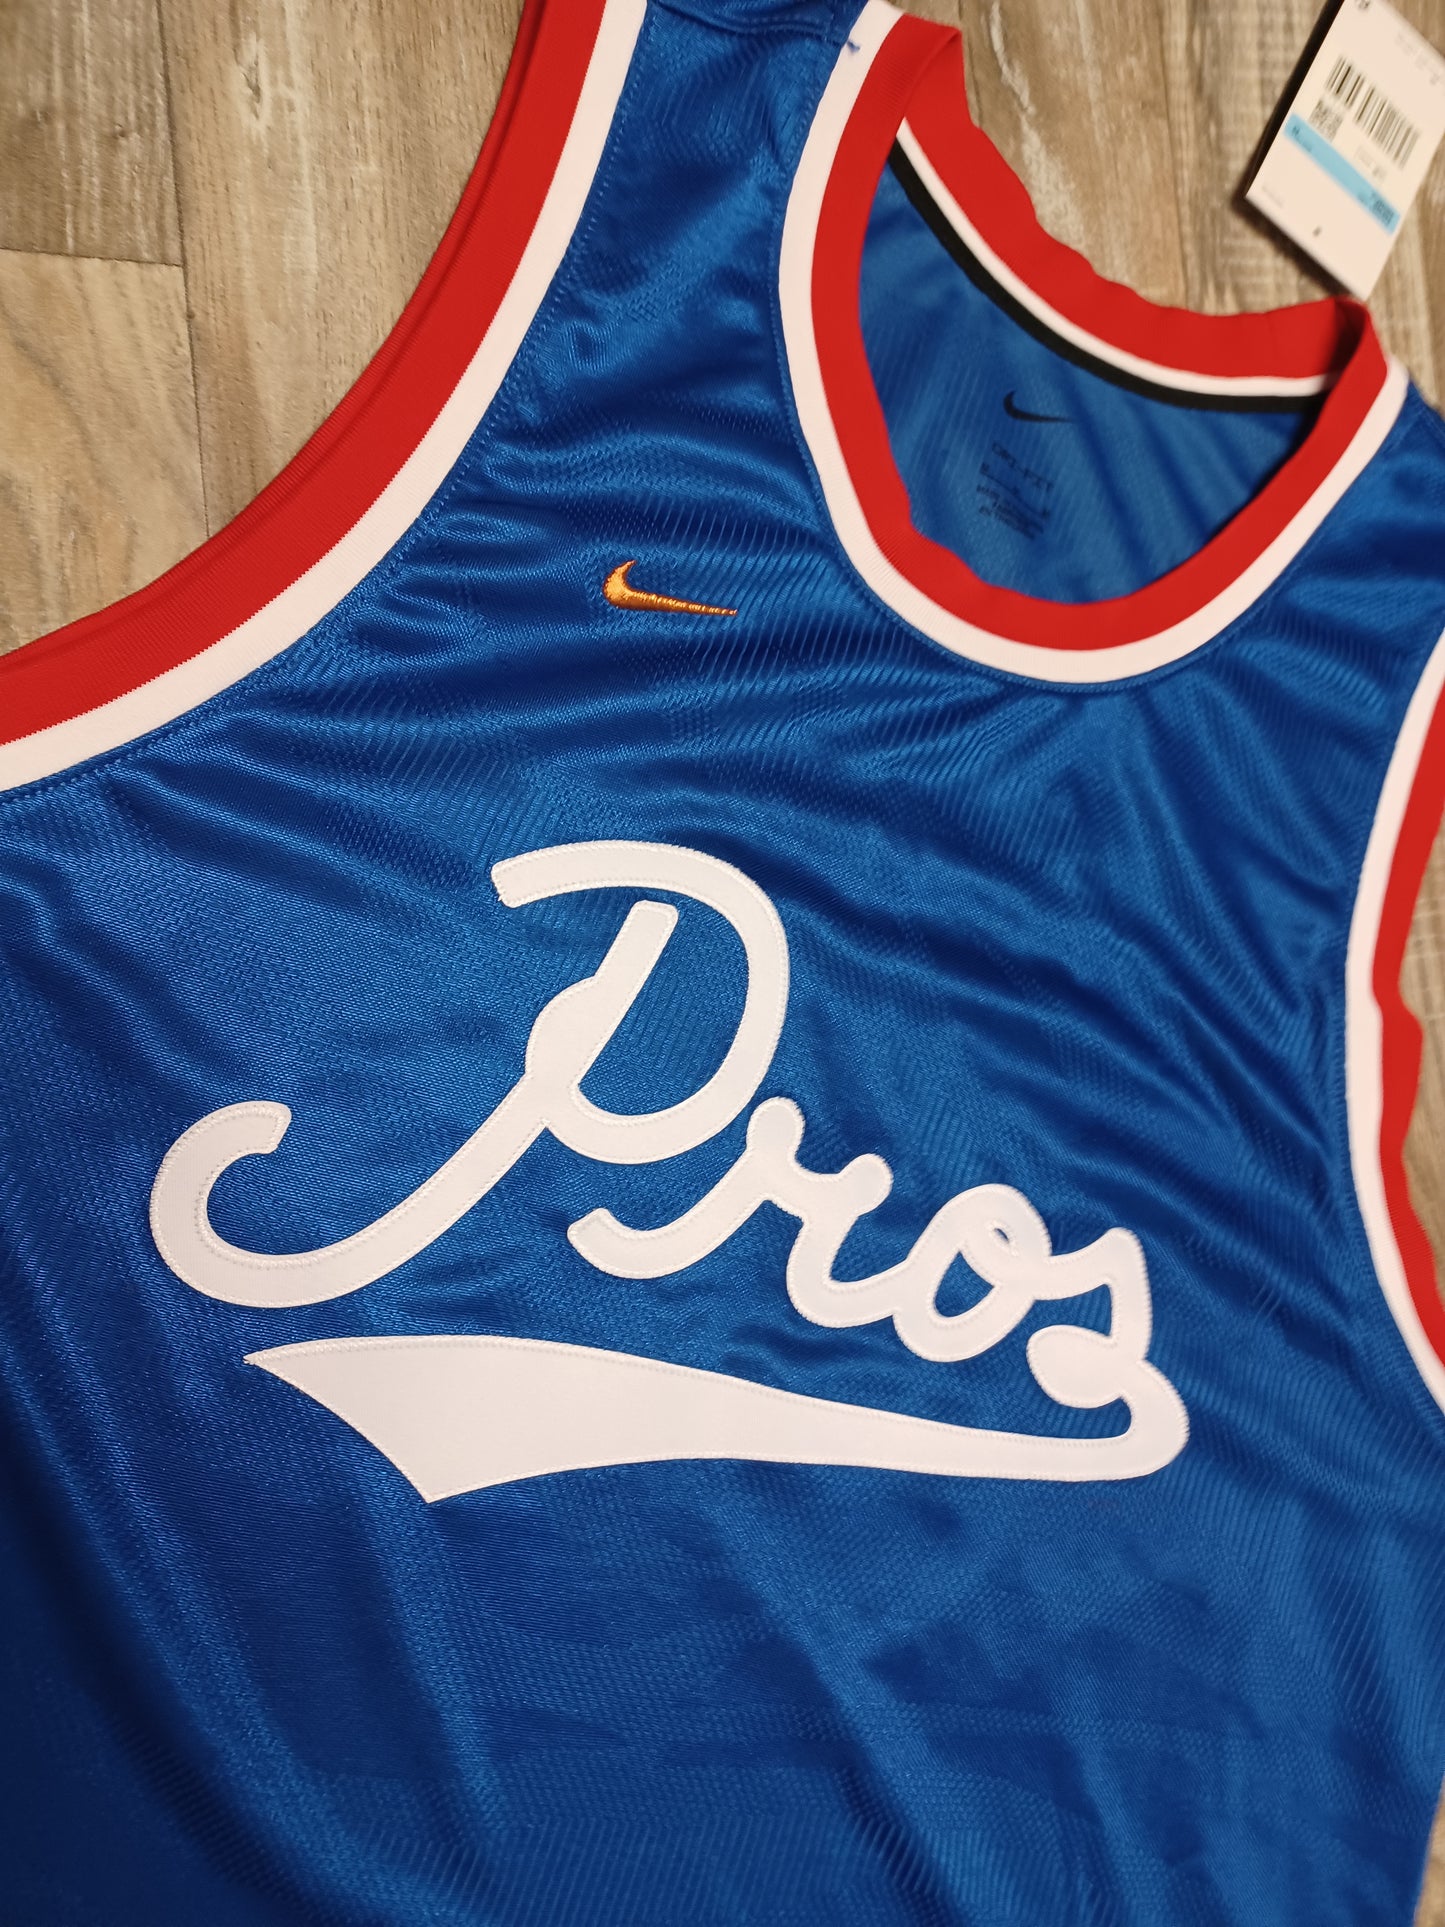 Lil Penny Pros Jersey Size Small